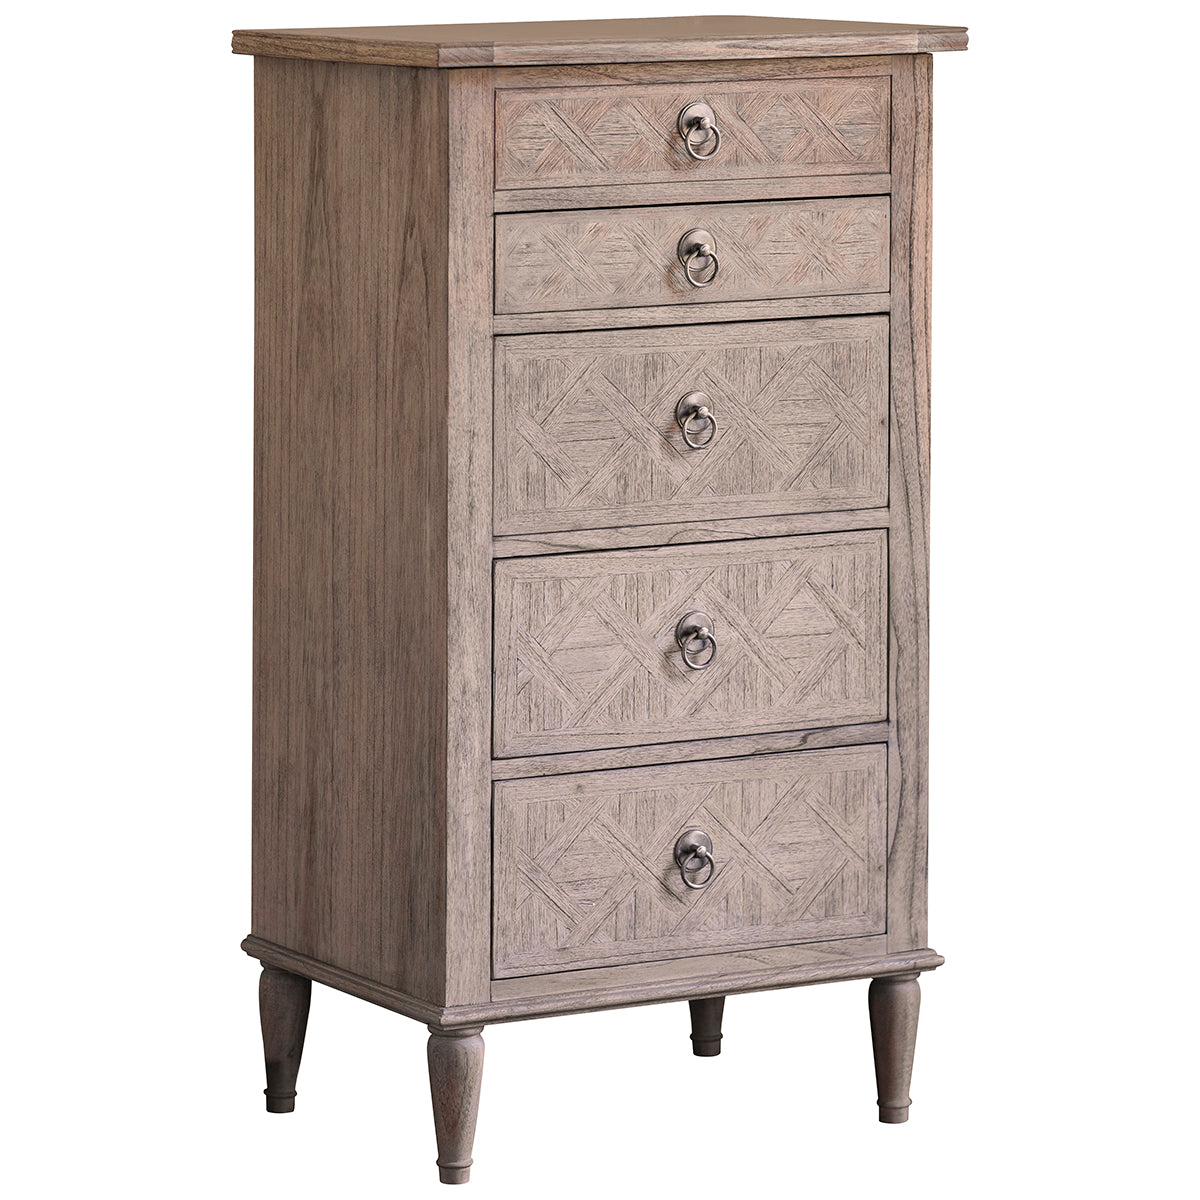 A Belsford 5 Drawer Lingerie Chest with an ornate design for interior decor.